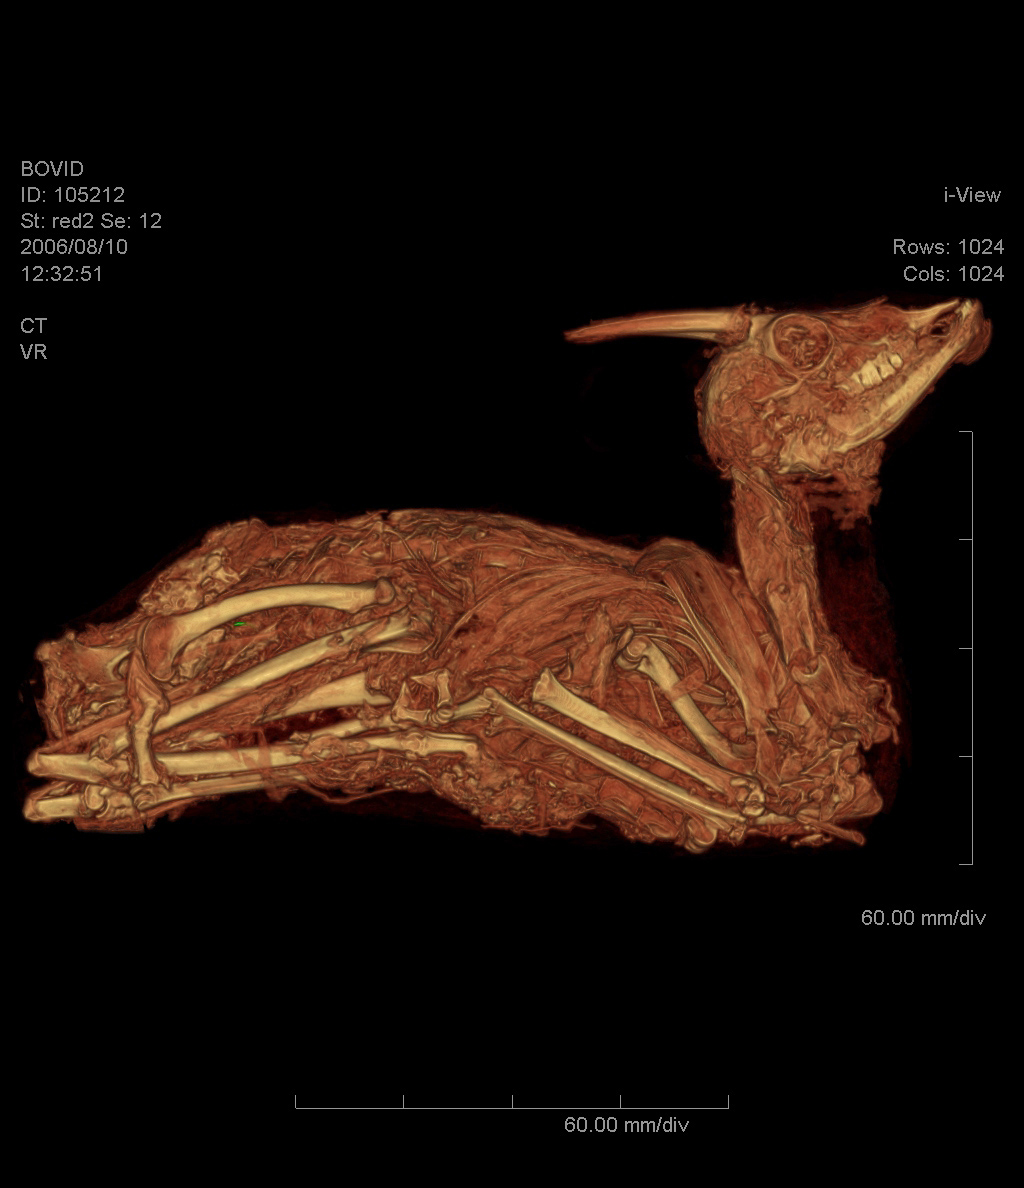 We can use software to remove the wrappings from the volume and look at what is underneath.  Here you can see what remains of the animal that was mummified.